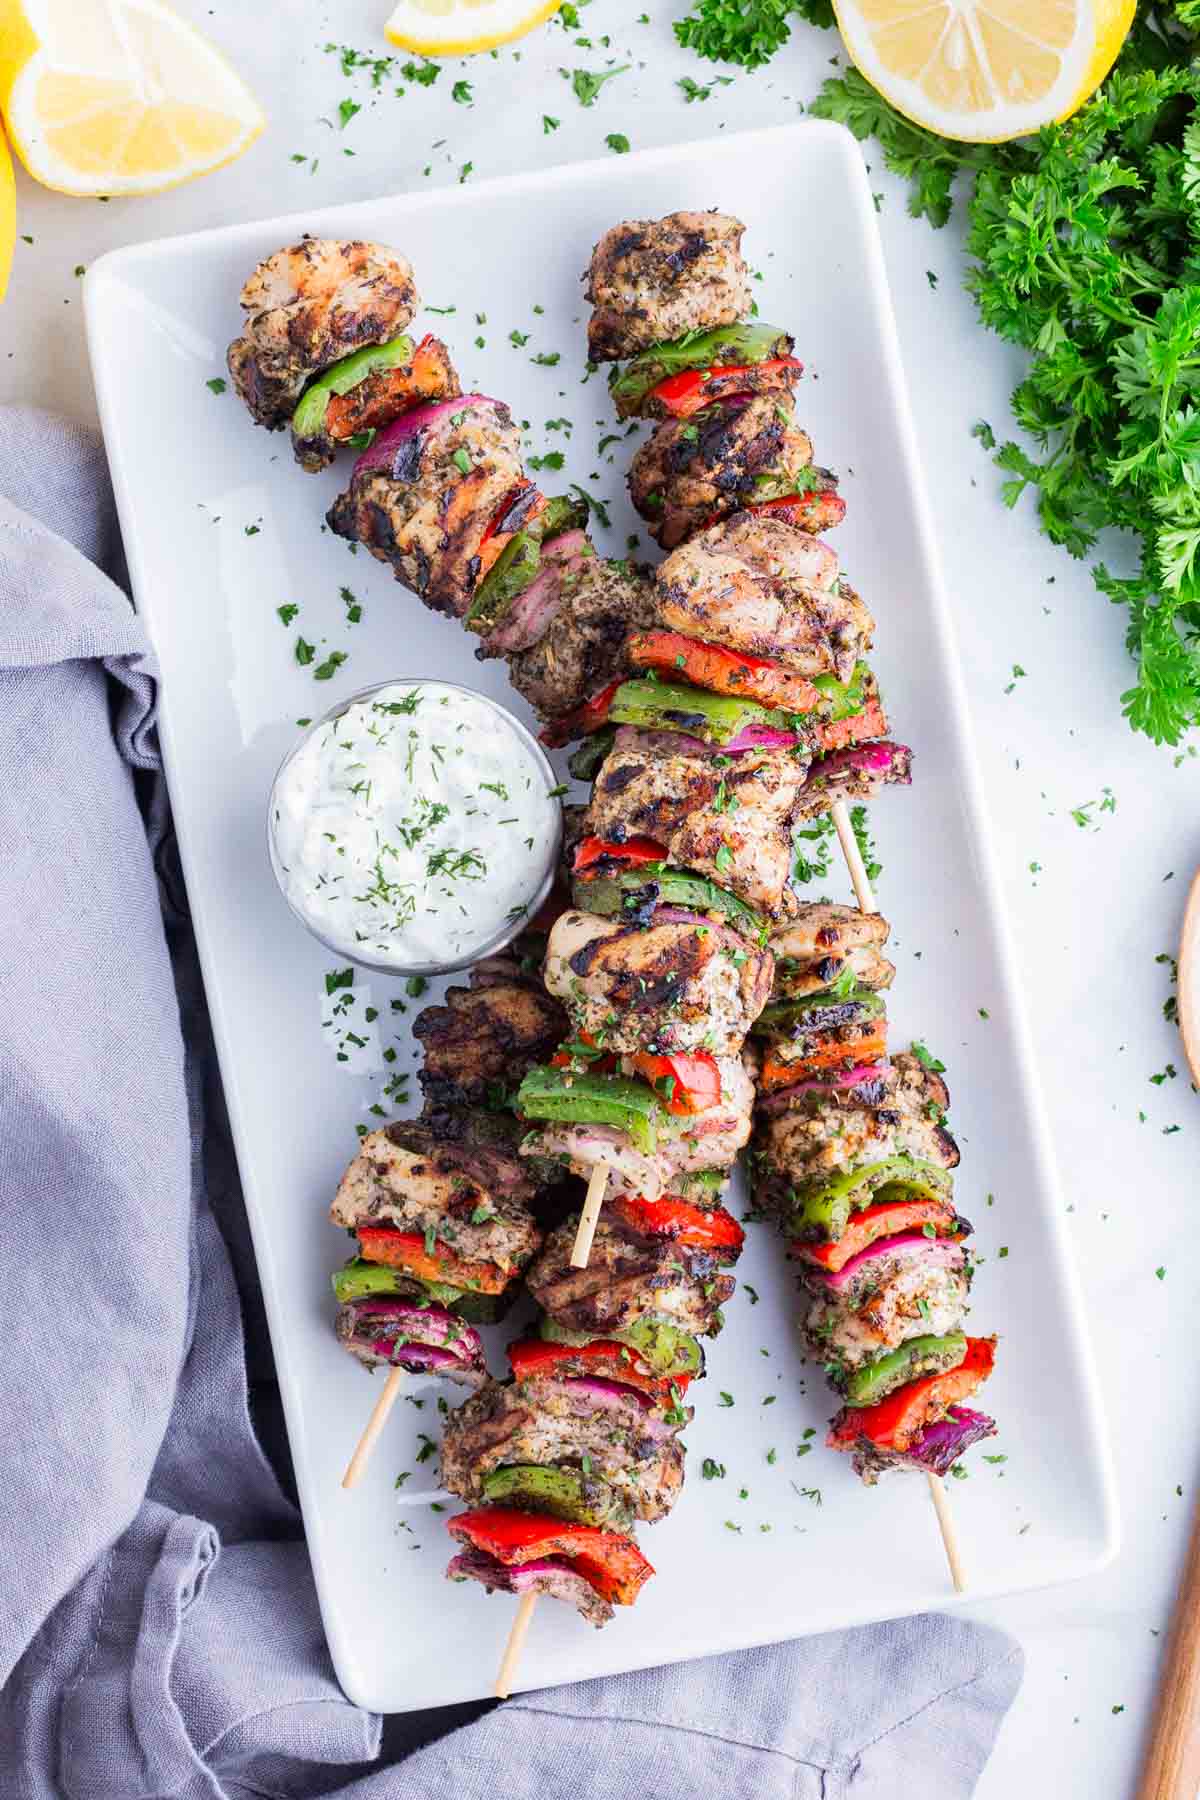 Greek chicken kabobs are served on a white plate with Tzatziki sauce.